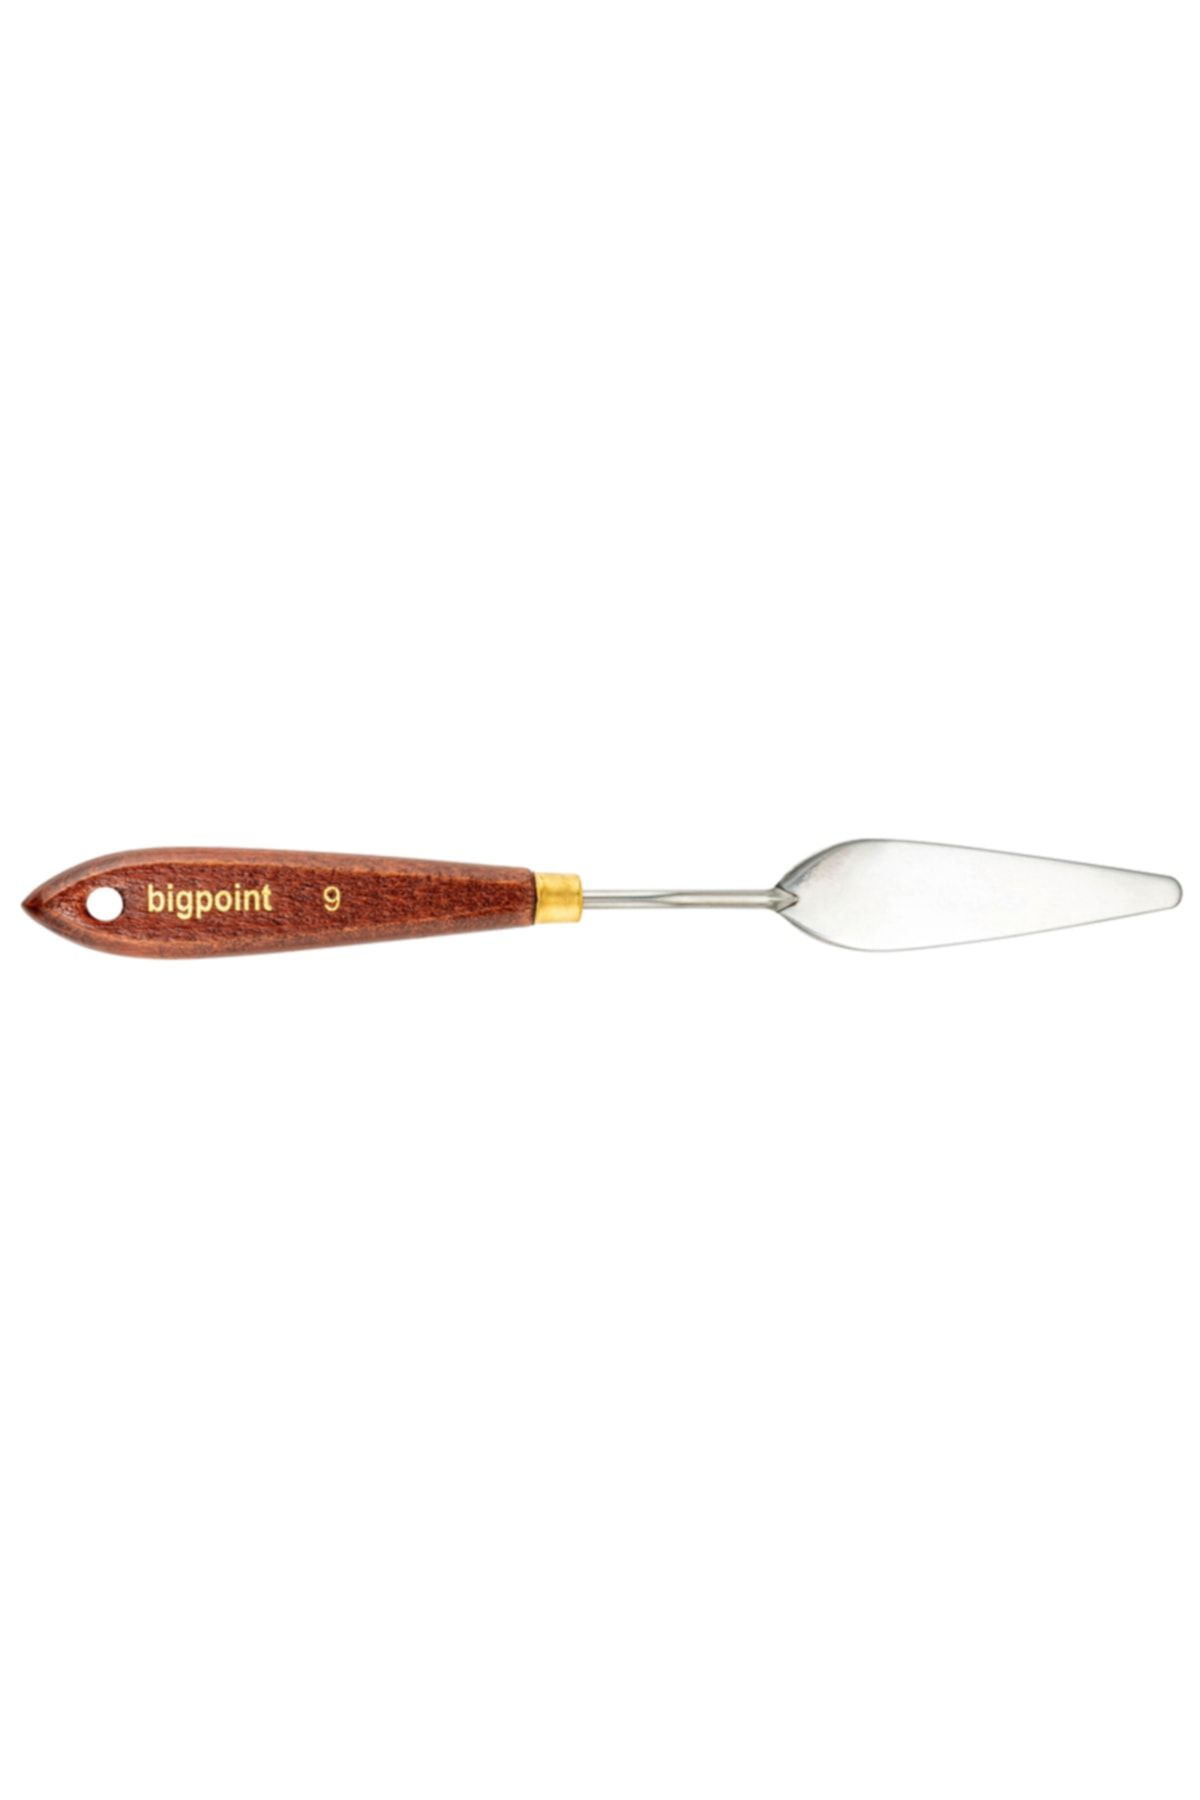 Bigpoint Metal Spatula No: 9 (painting Knife)